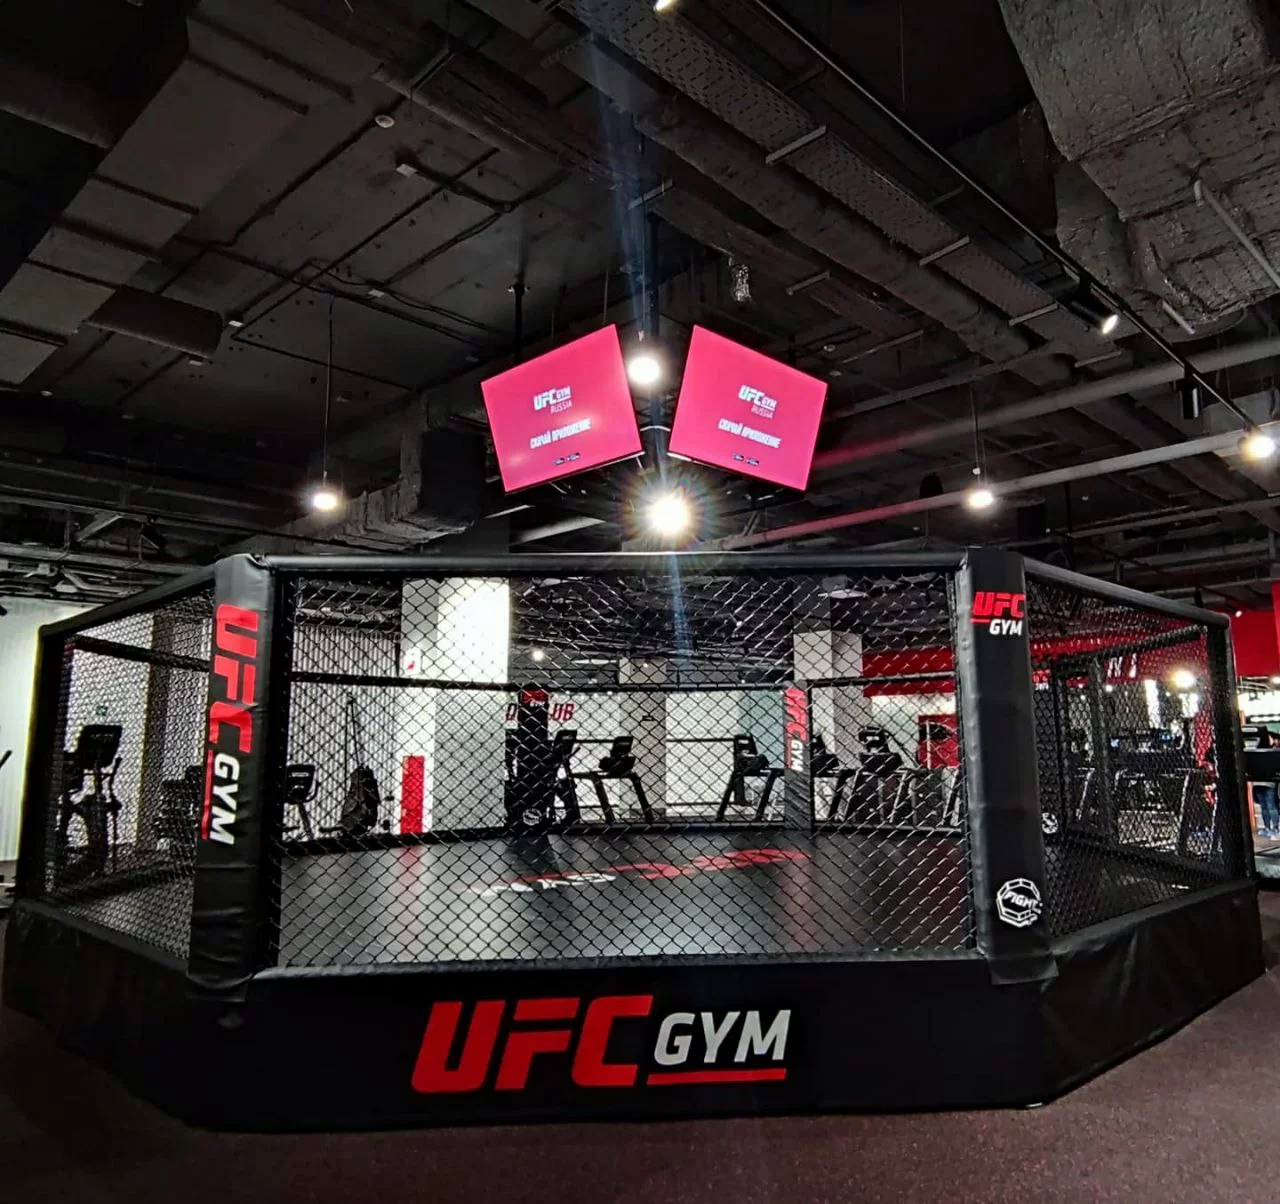 Opening of the UFC GYM fitness center